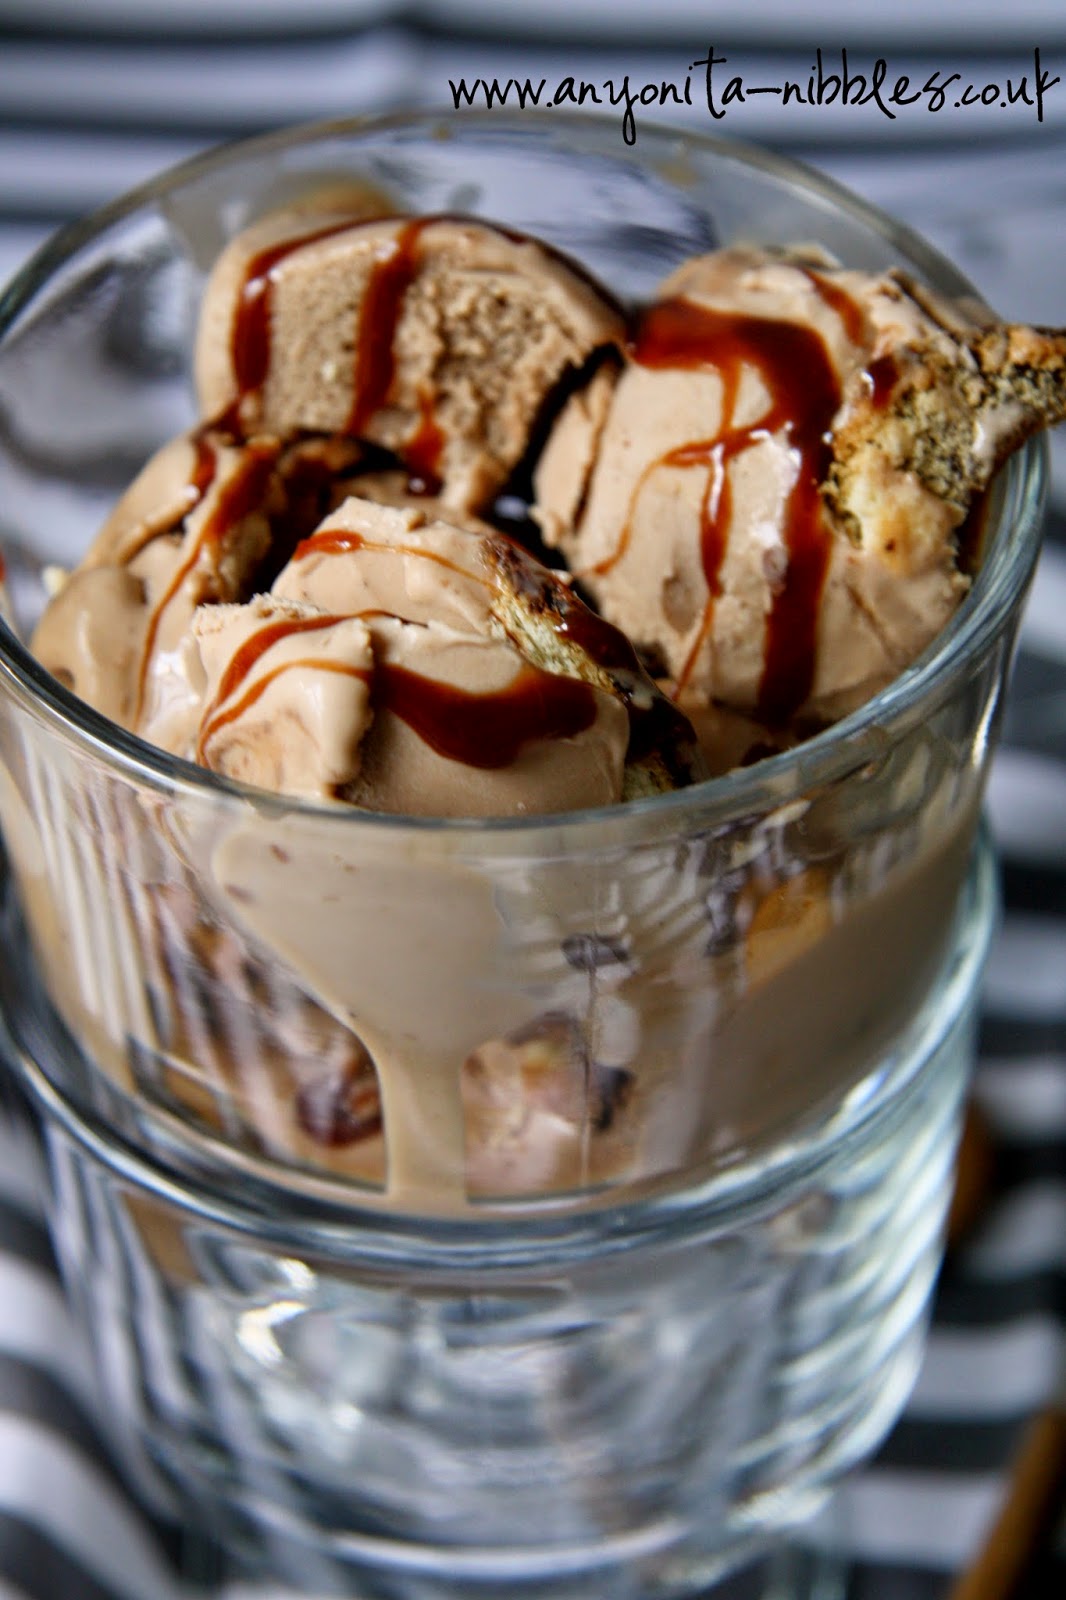 Smooth and creamy chocolate ice cream by Anyonita Nibbles